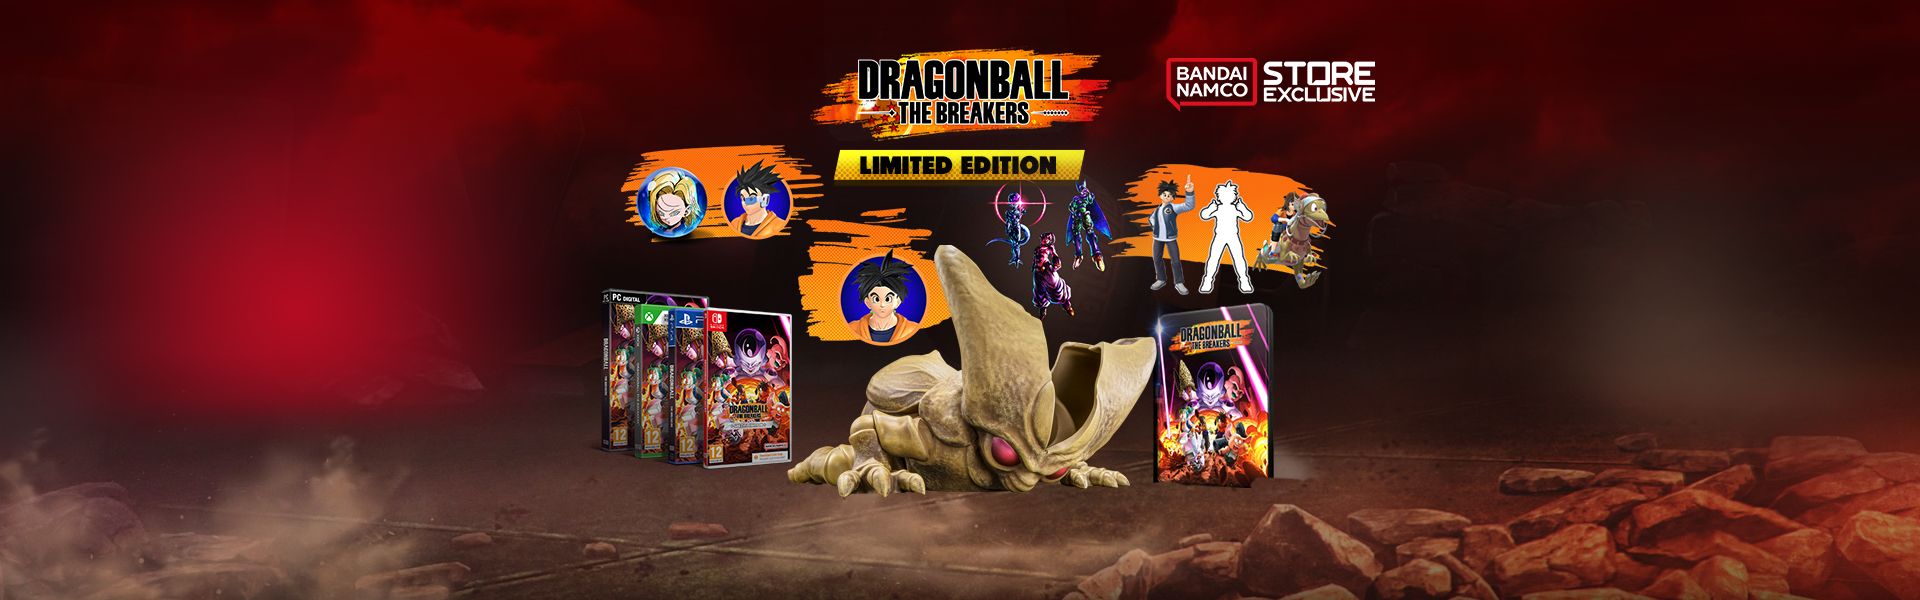 DRAGON BALL: THE BREAKERS - LIMITED EDITION